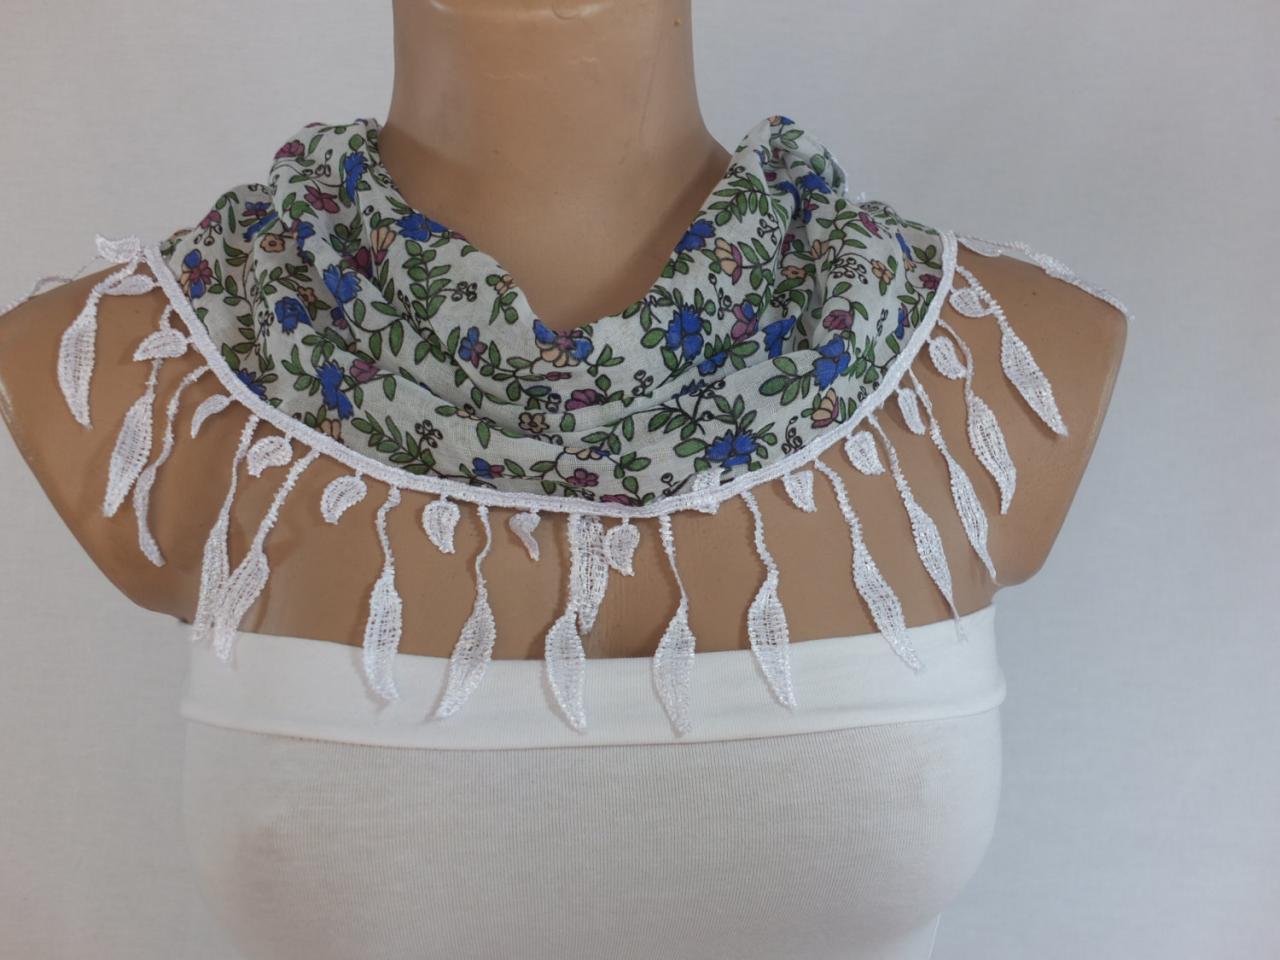 White Floral Cotton Scarf, Woman Fashion Scarf, Cowl With Lace Trim, Accessory,neckwarmer, Scarf Necklace, Foulard,scarflette,